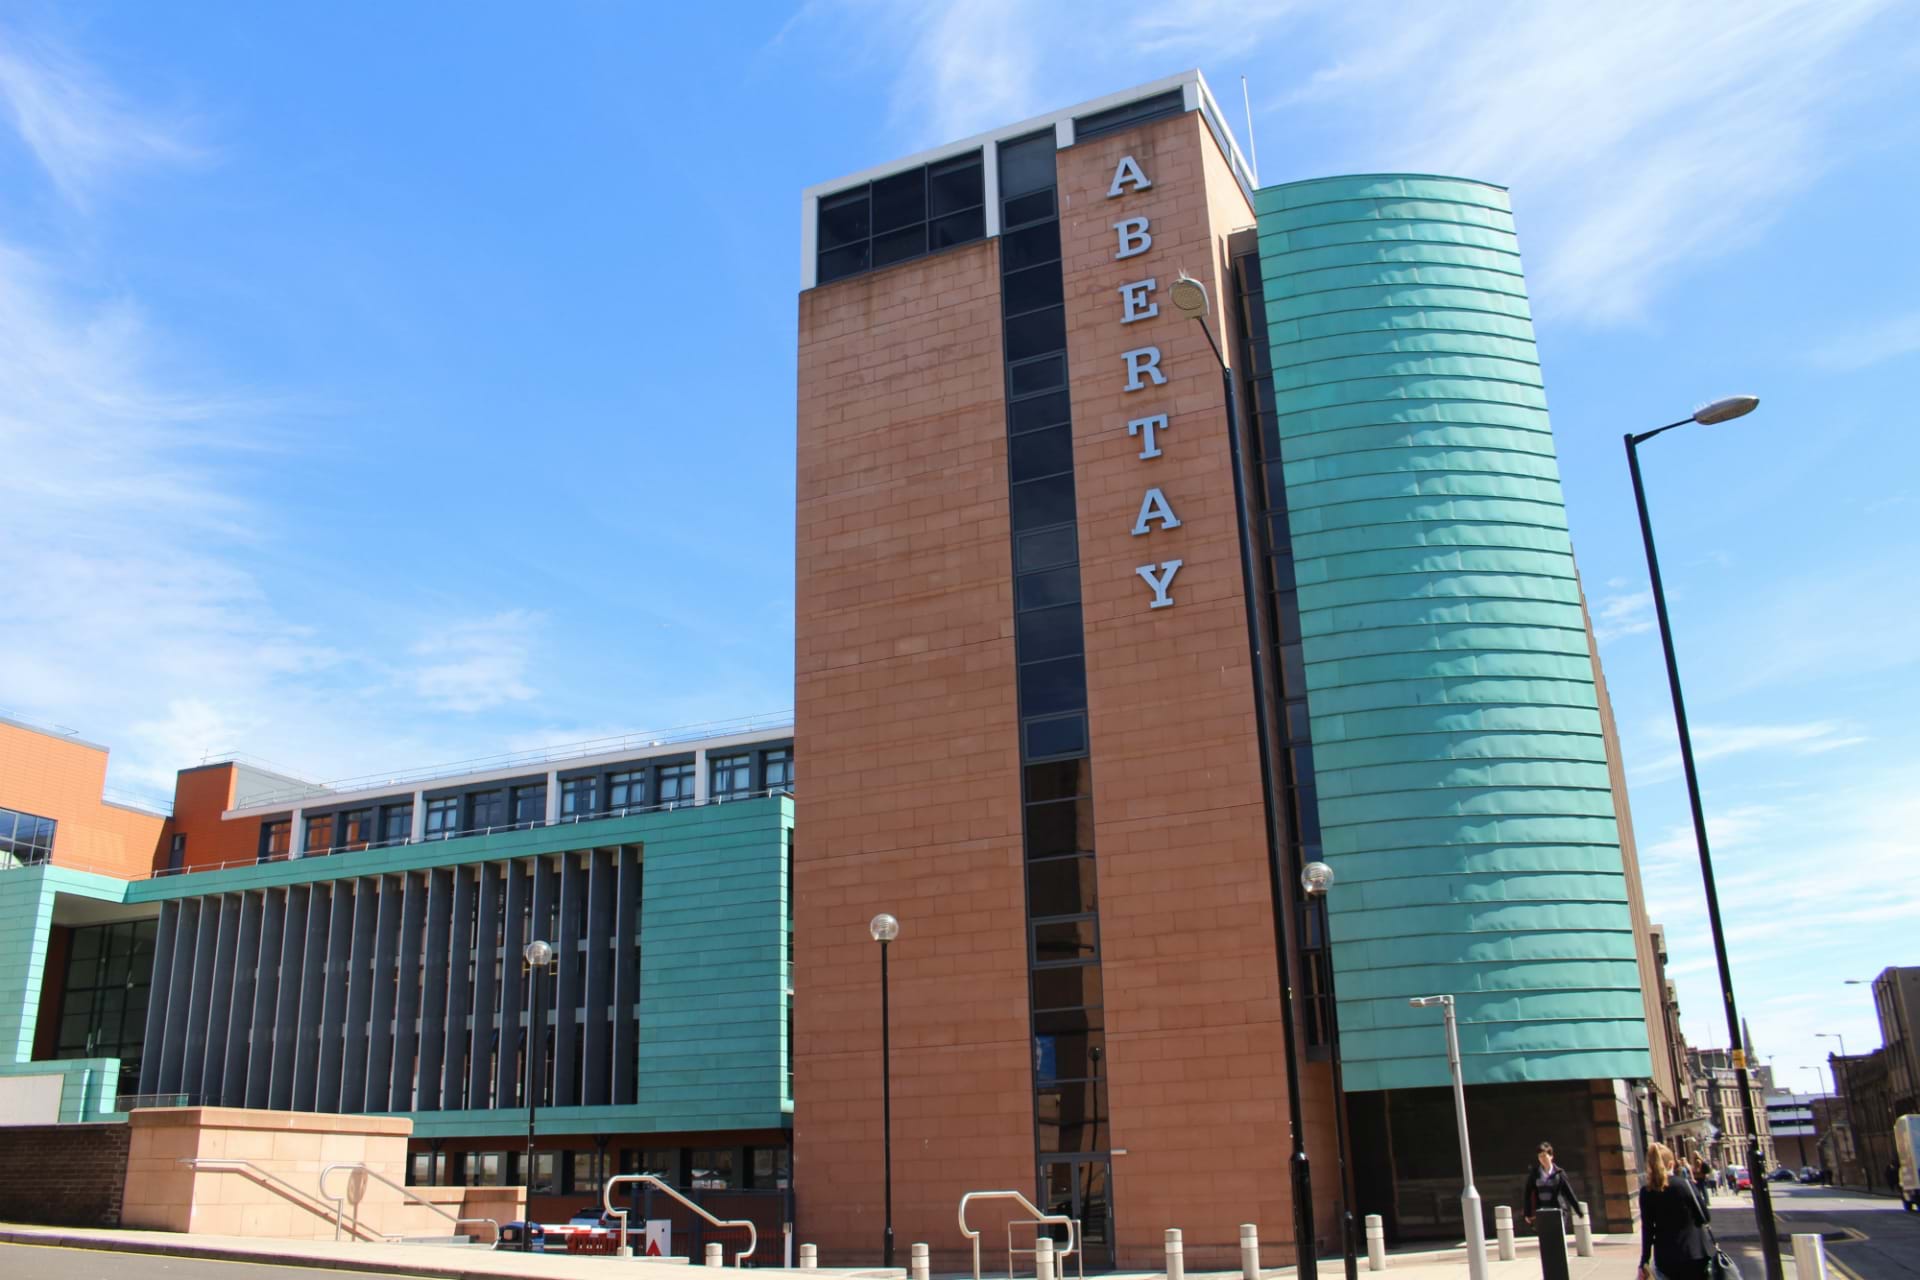 The image shows the Abertay Kydd Building on a sunny day